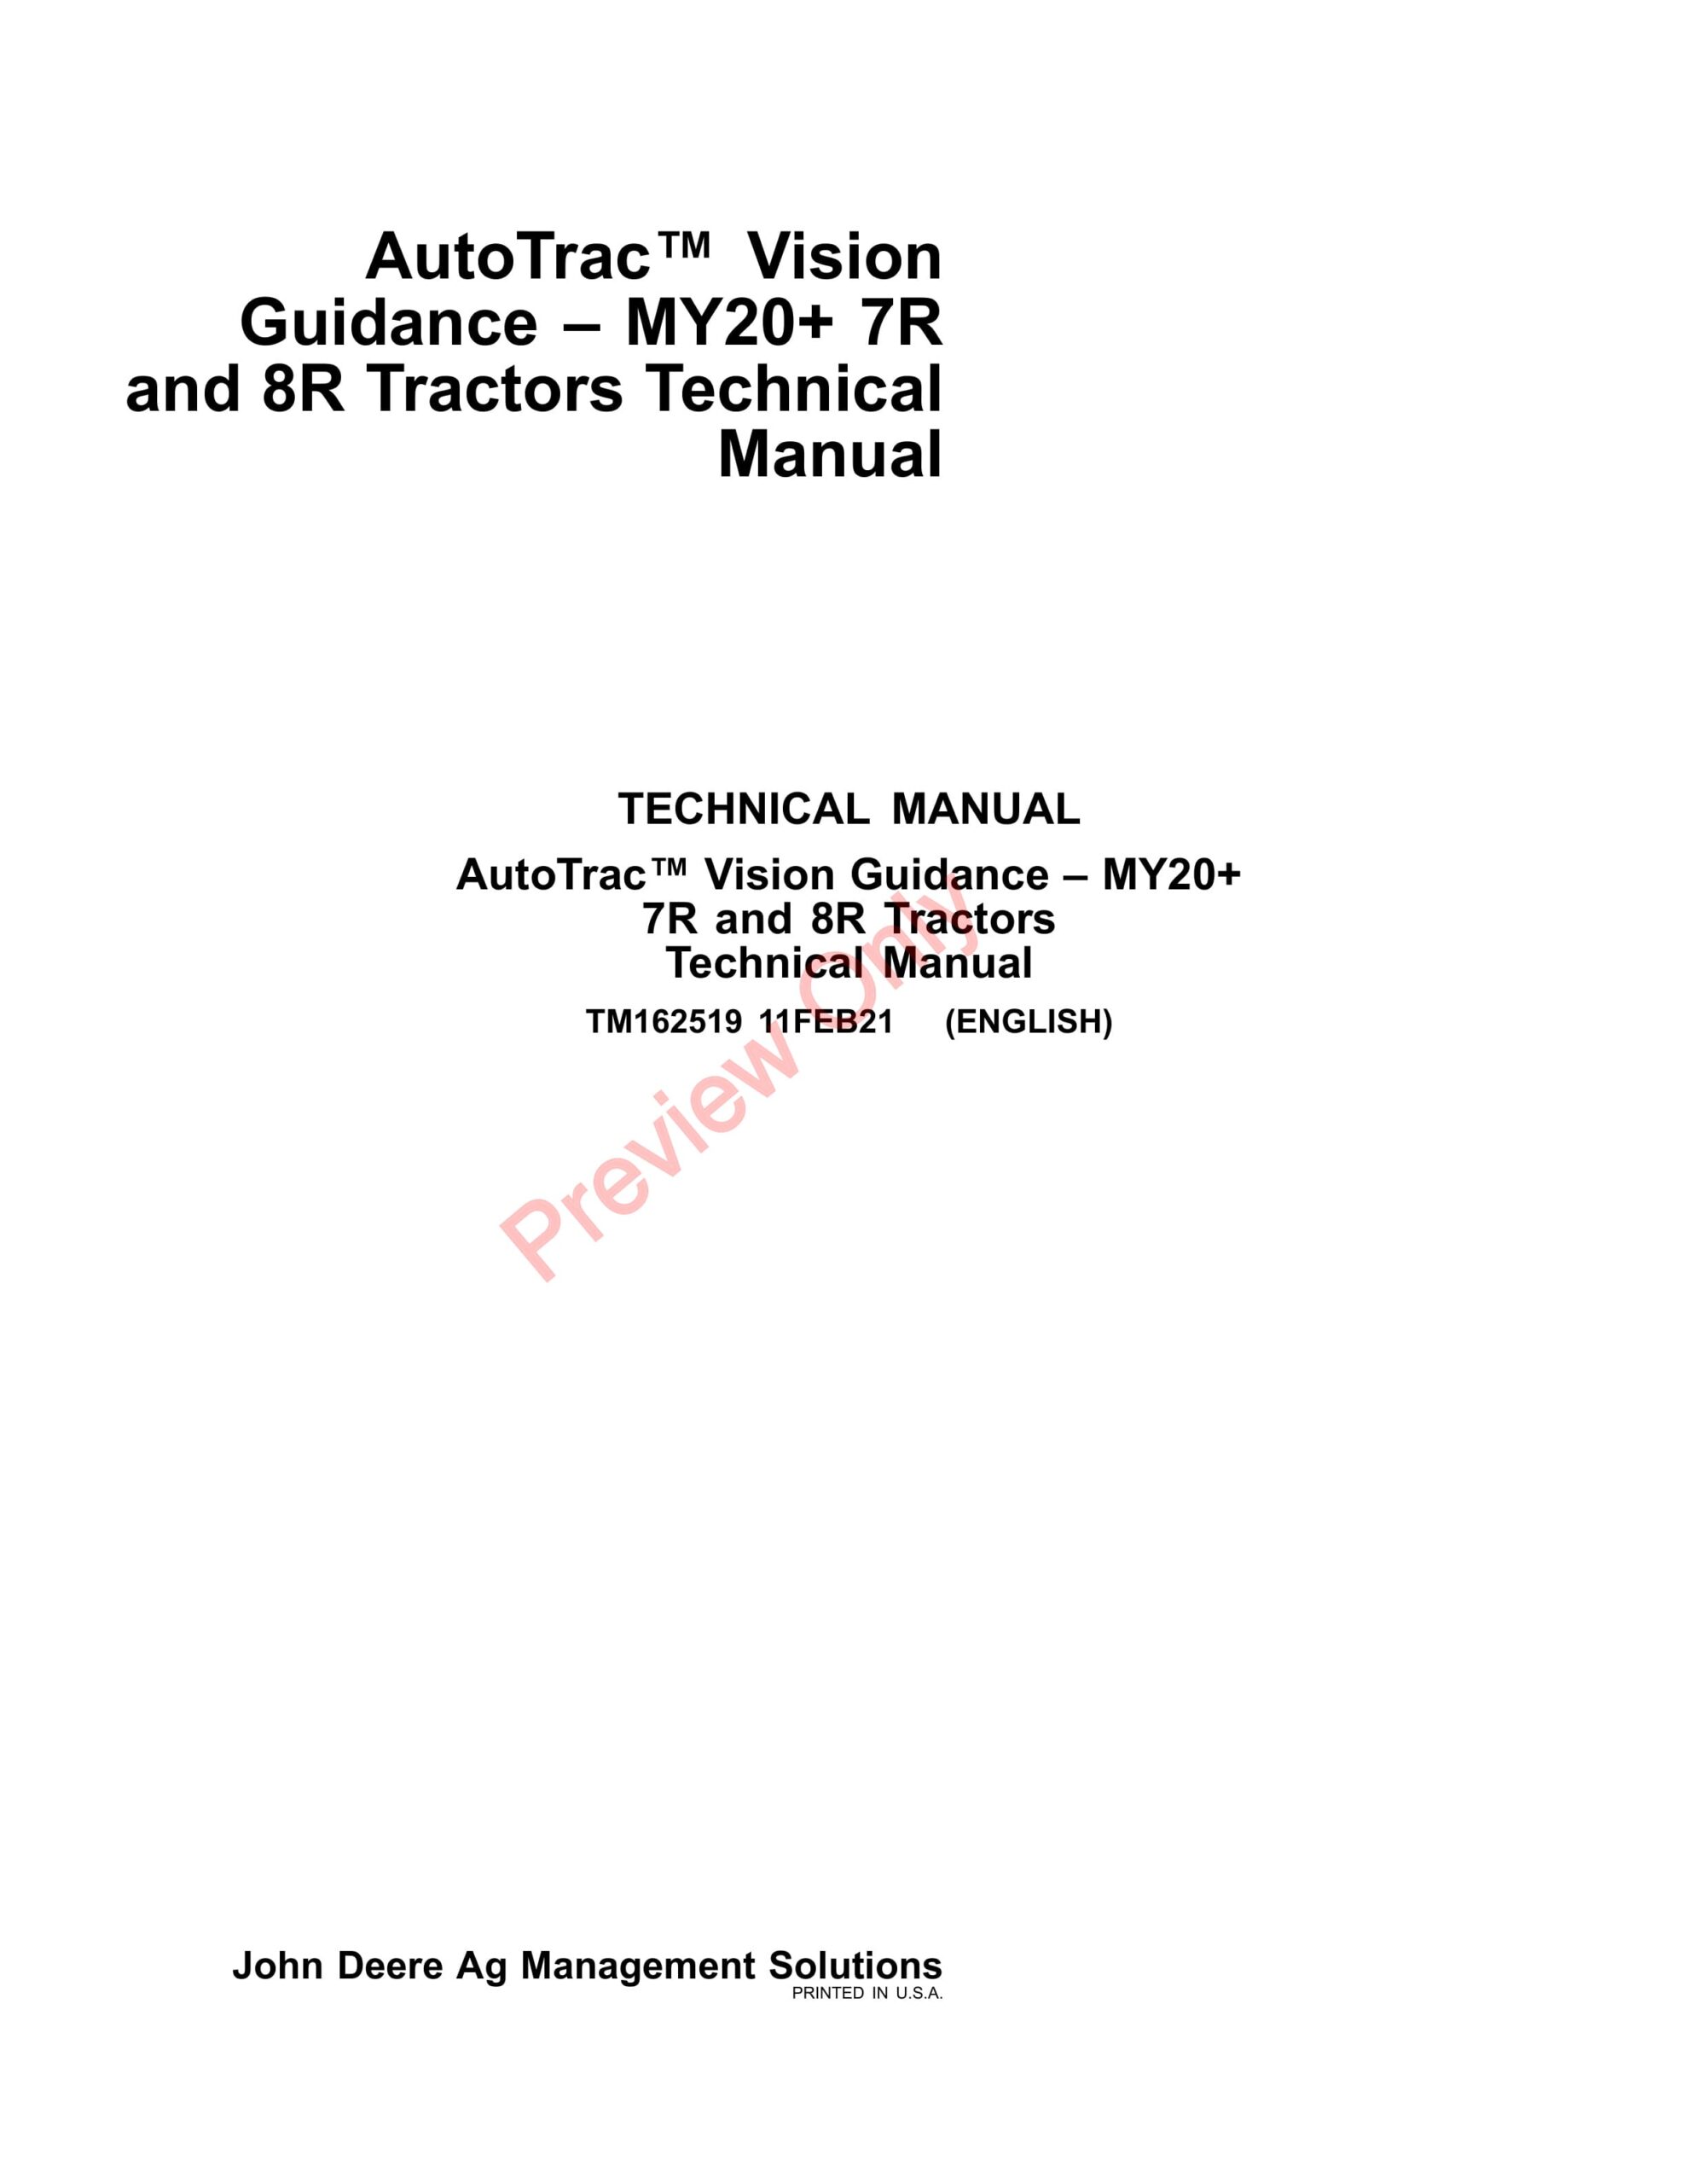 John Deere AutoTrac Vision Guidance – (7R and 8R Tractors MY20-) Technical Manual TM162519 11FEB21-1